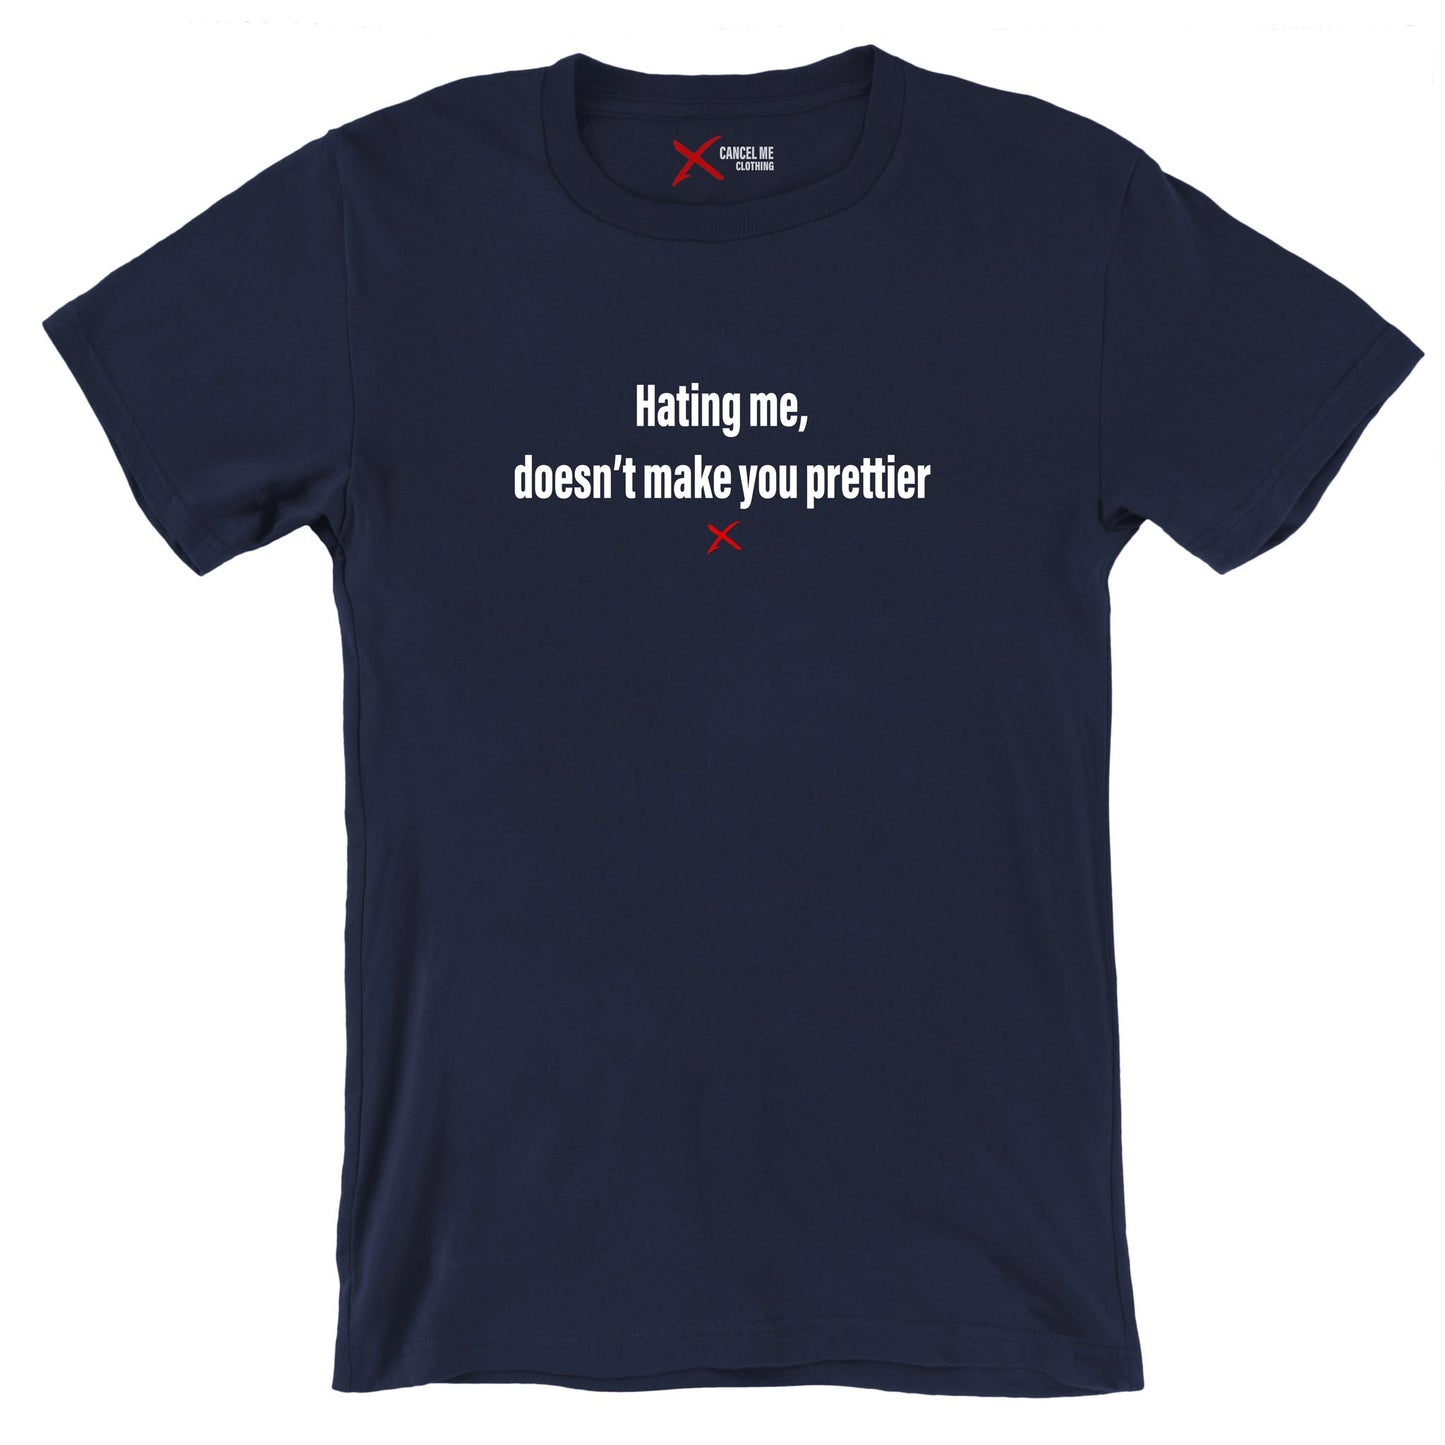 Hating me, doesn't make you prettier - Shirt